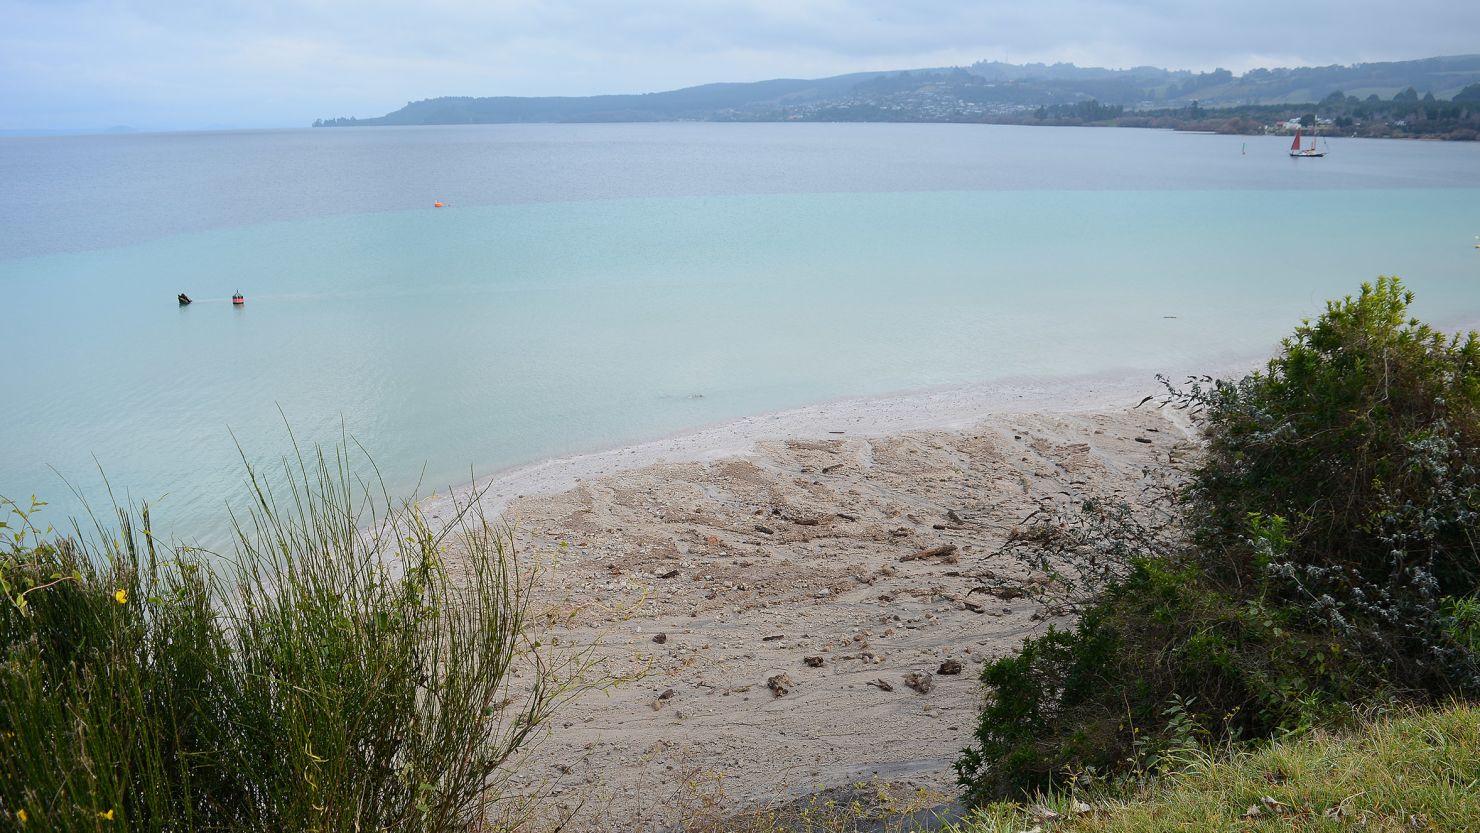 800,000 liters of waste water flowed into Lake Taupo in New Zealand on July 2, 2019.